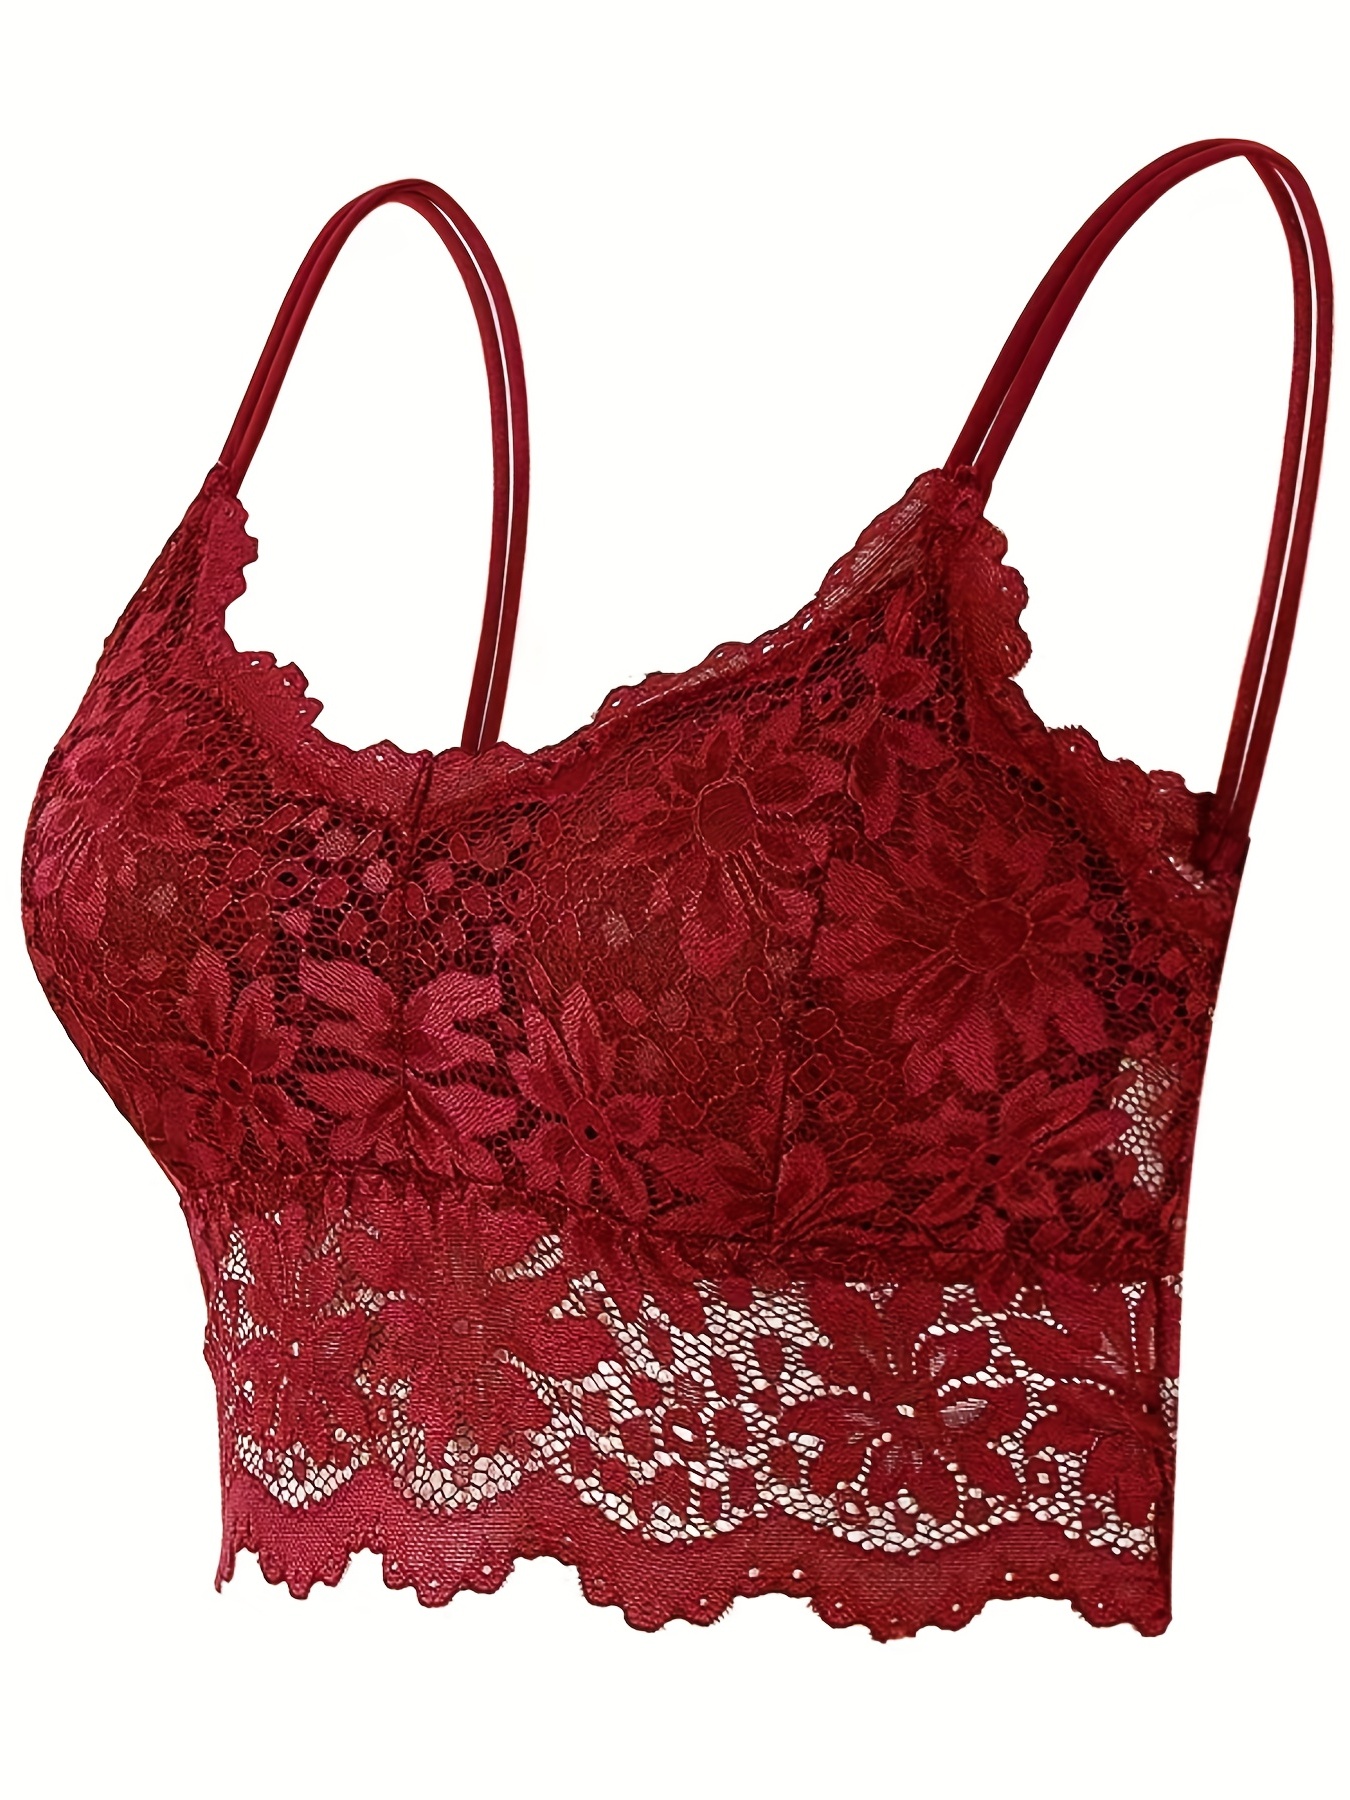 AAA Cup Bralette Vest, Soft Bra and Briefs, Burgundy and Black Short  Camisole 